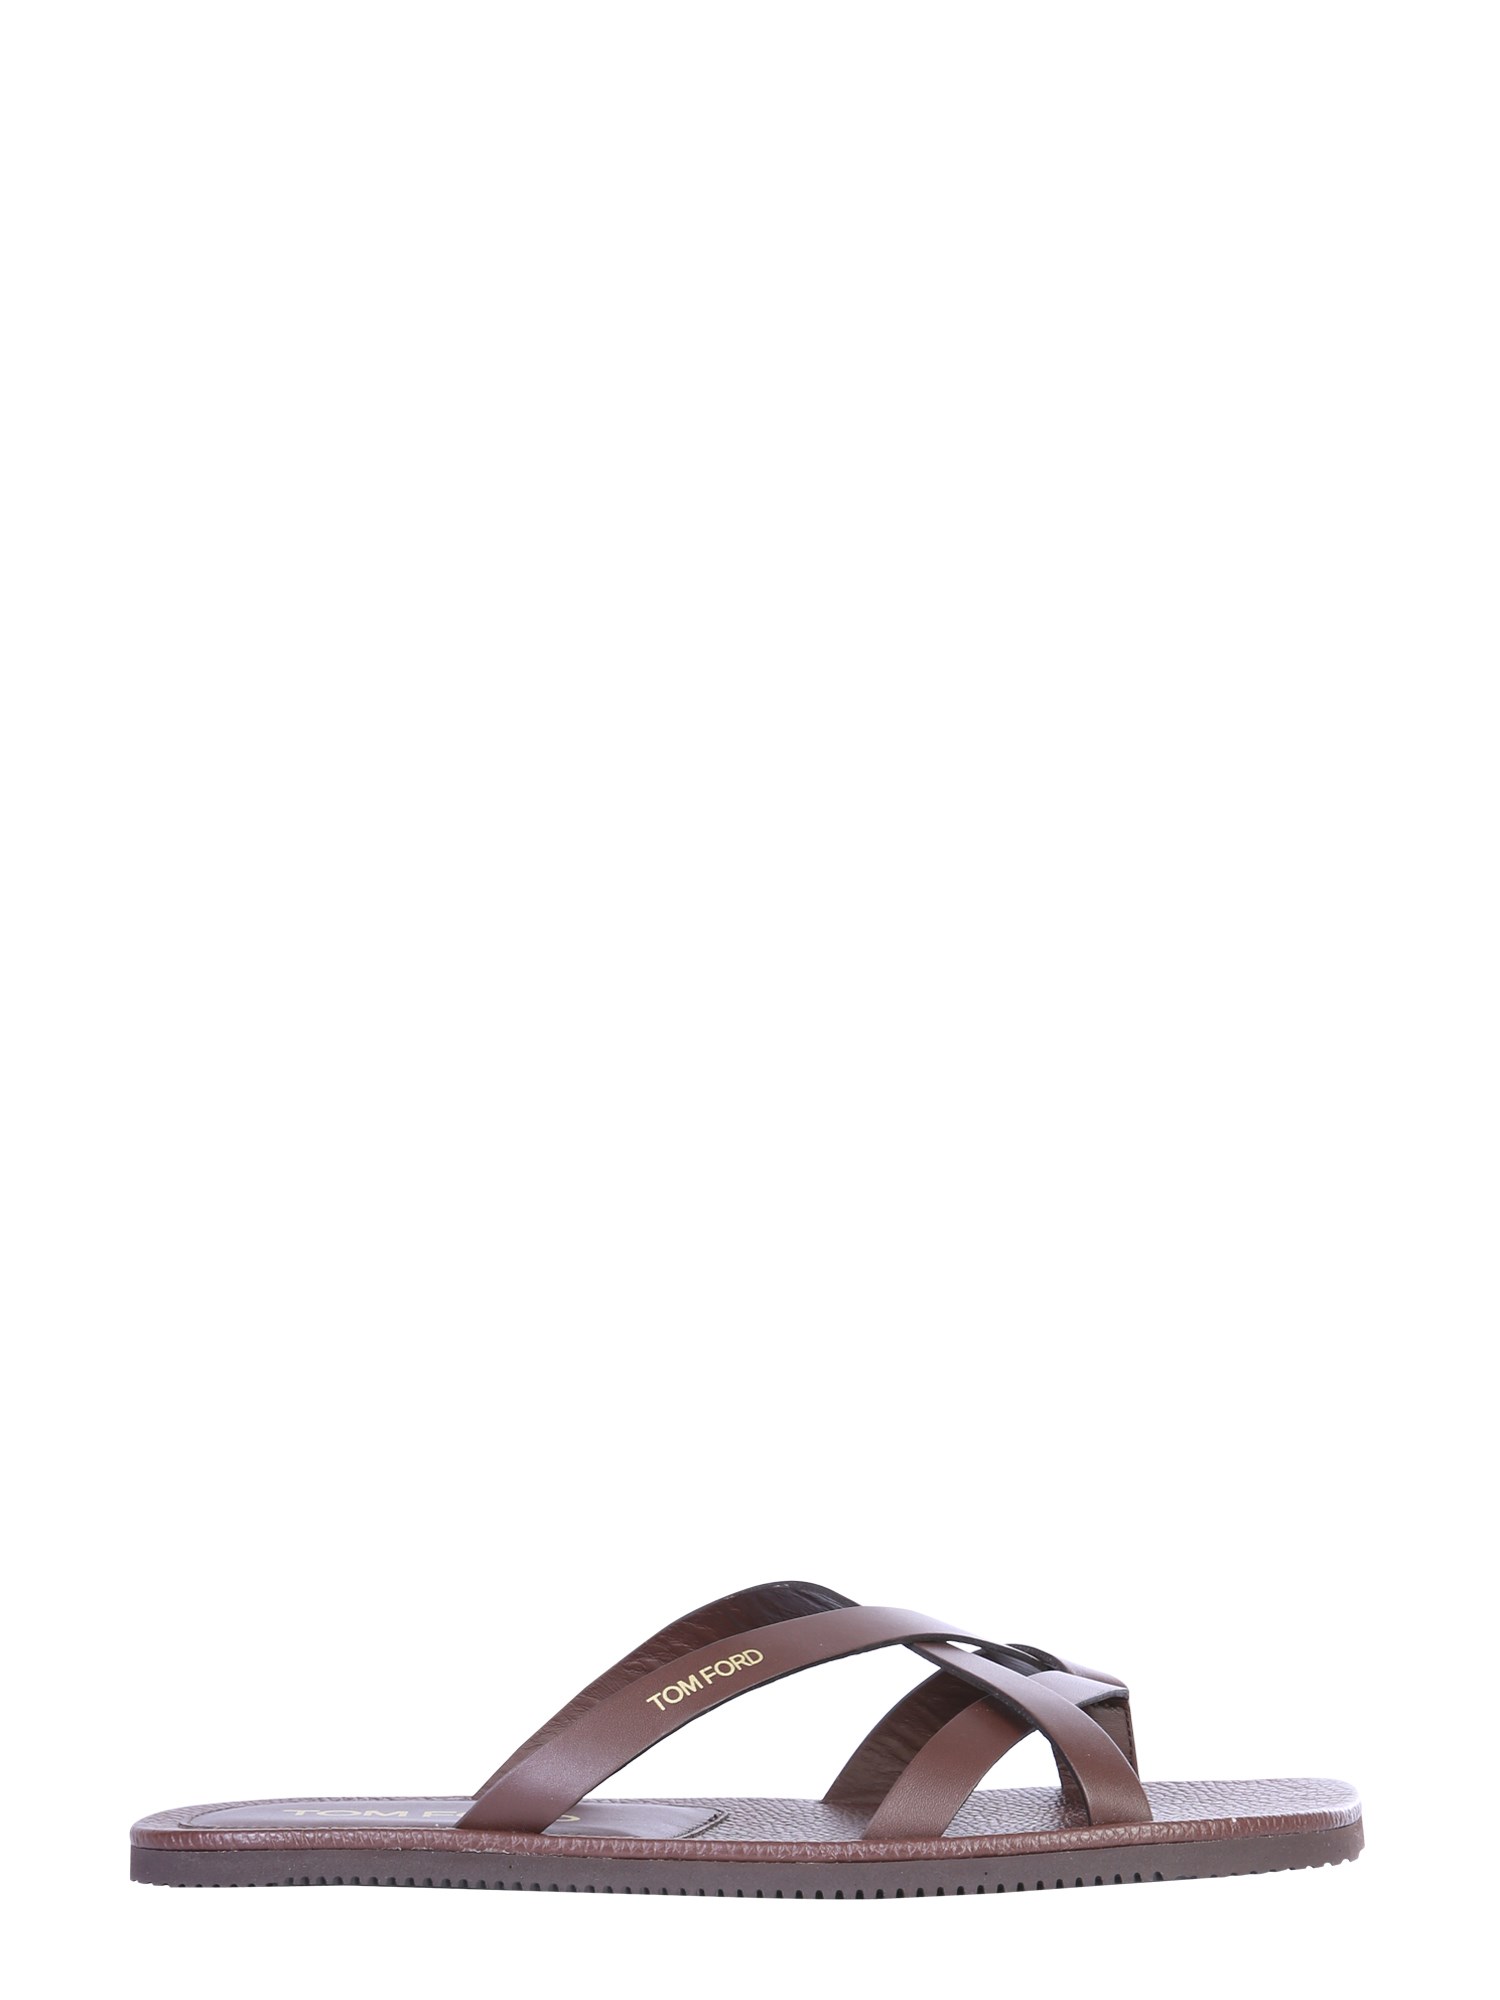 TOM FORD SANDALS WITH LOGO,176718